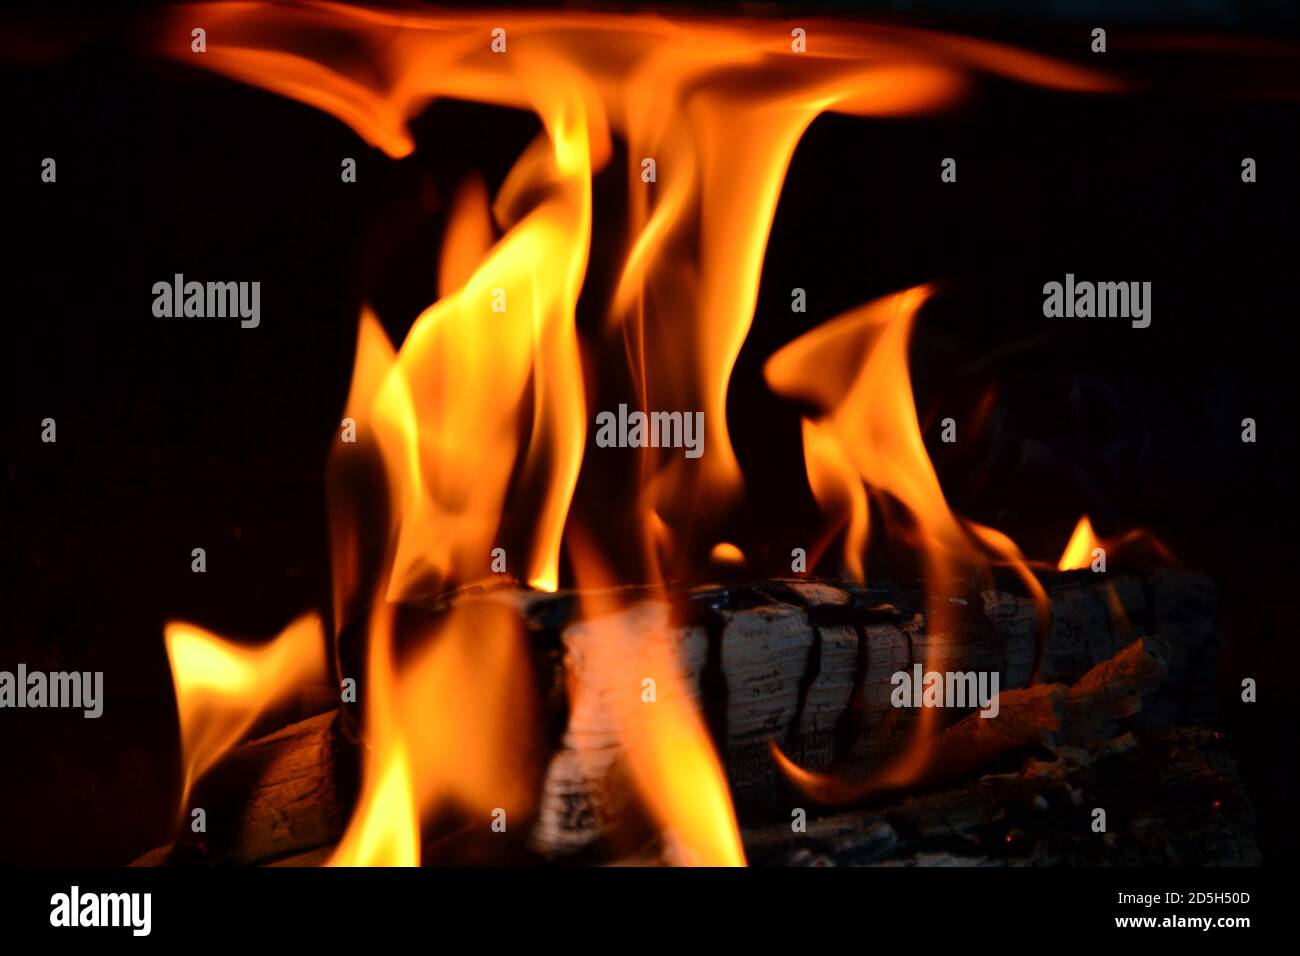 Burning wood, flames from near. Flaring fire in the fireplace. Stock Photo